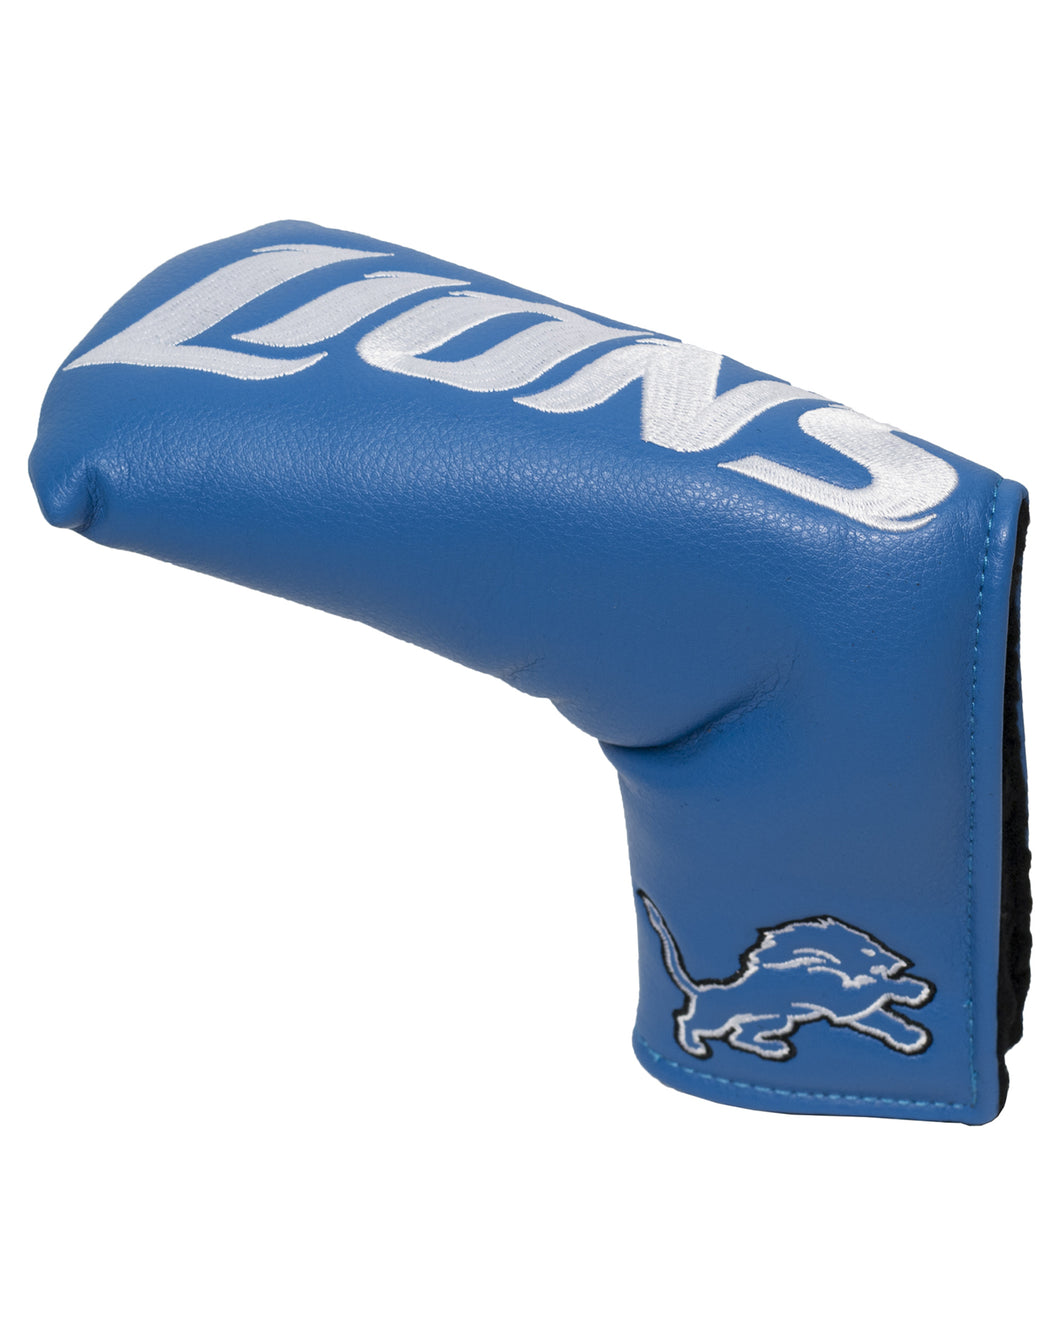 NFL Official Vintage Golf Blade Style Putter Headcover. Detroit Lions